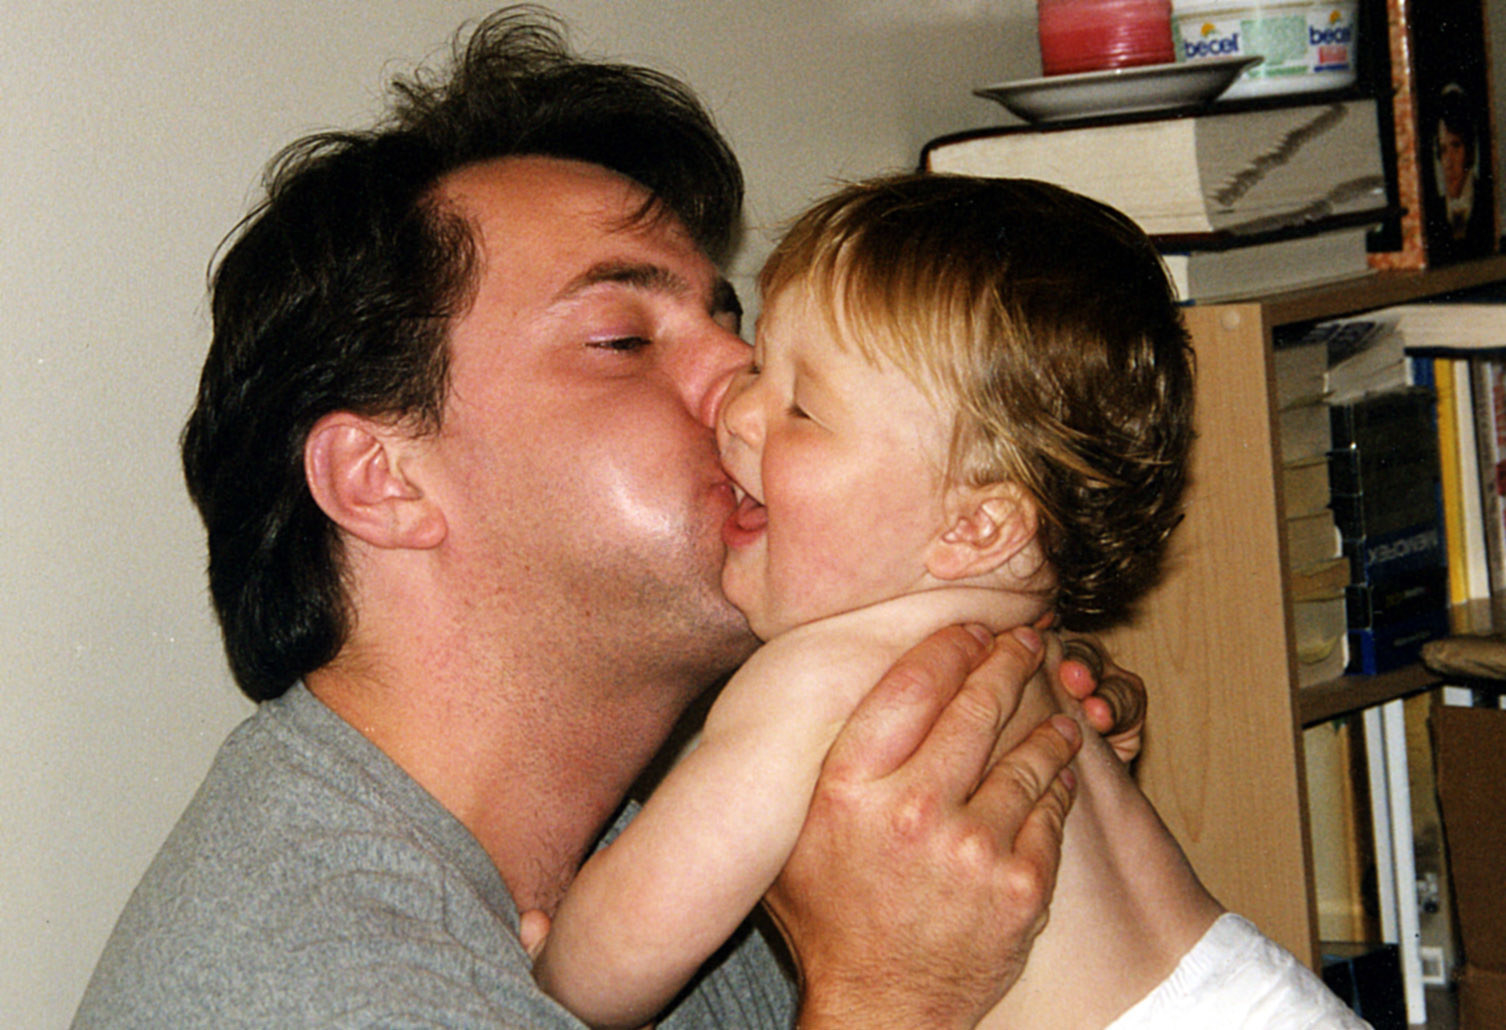 A man kisses his infant son on the cheek